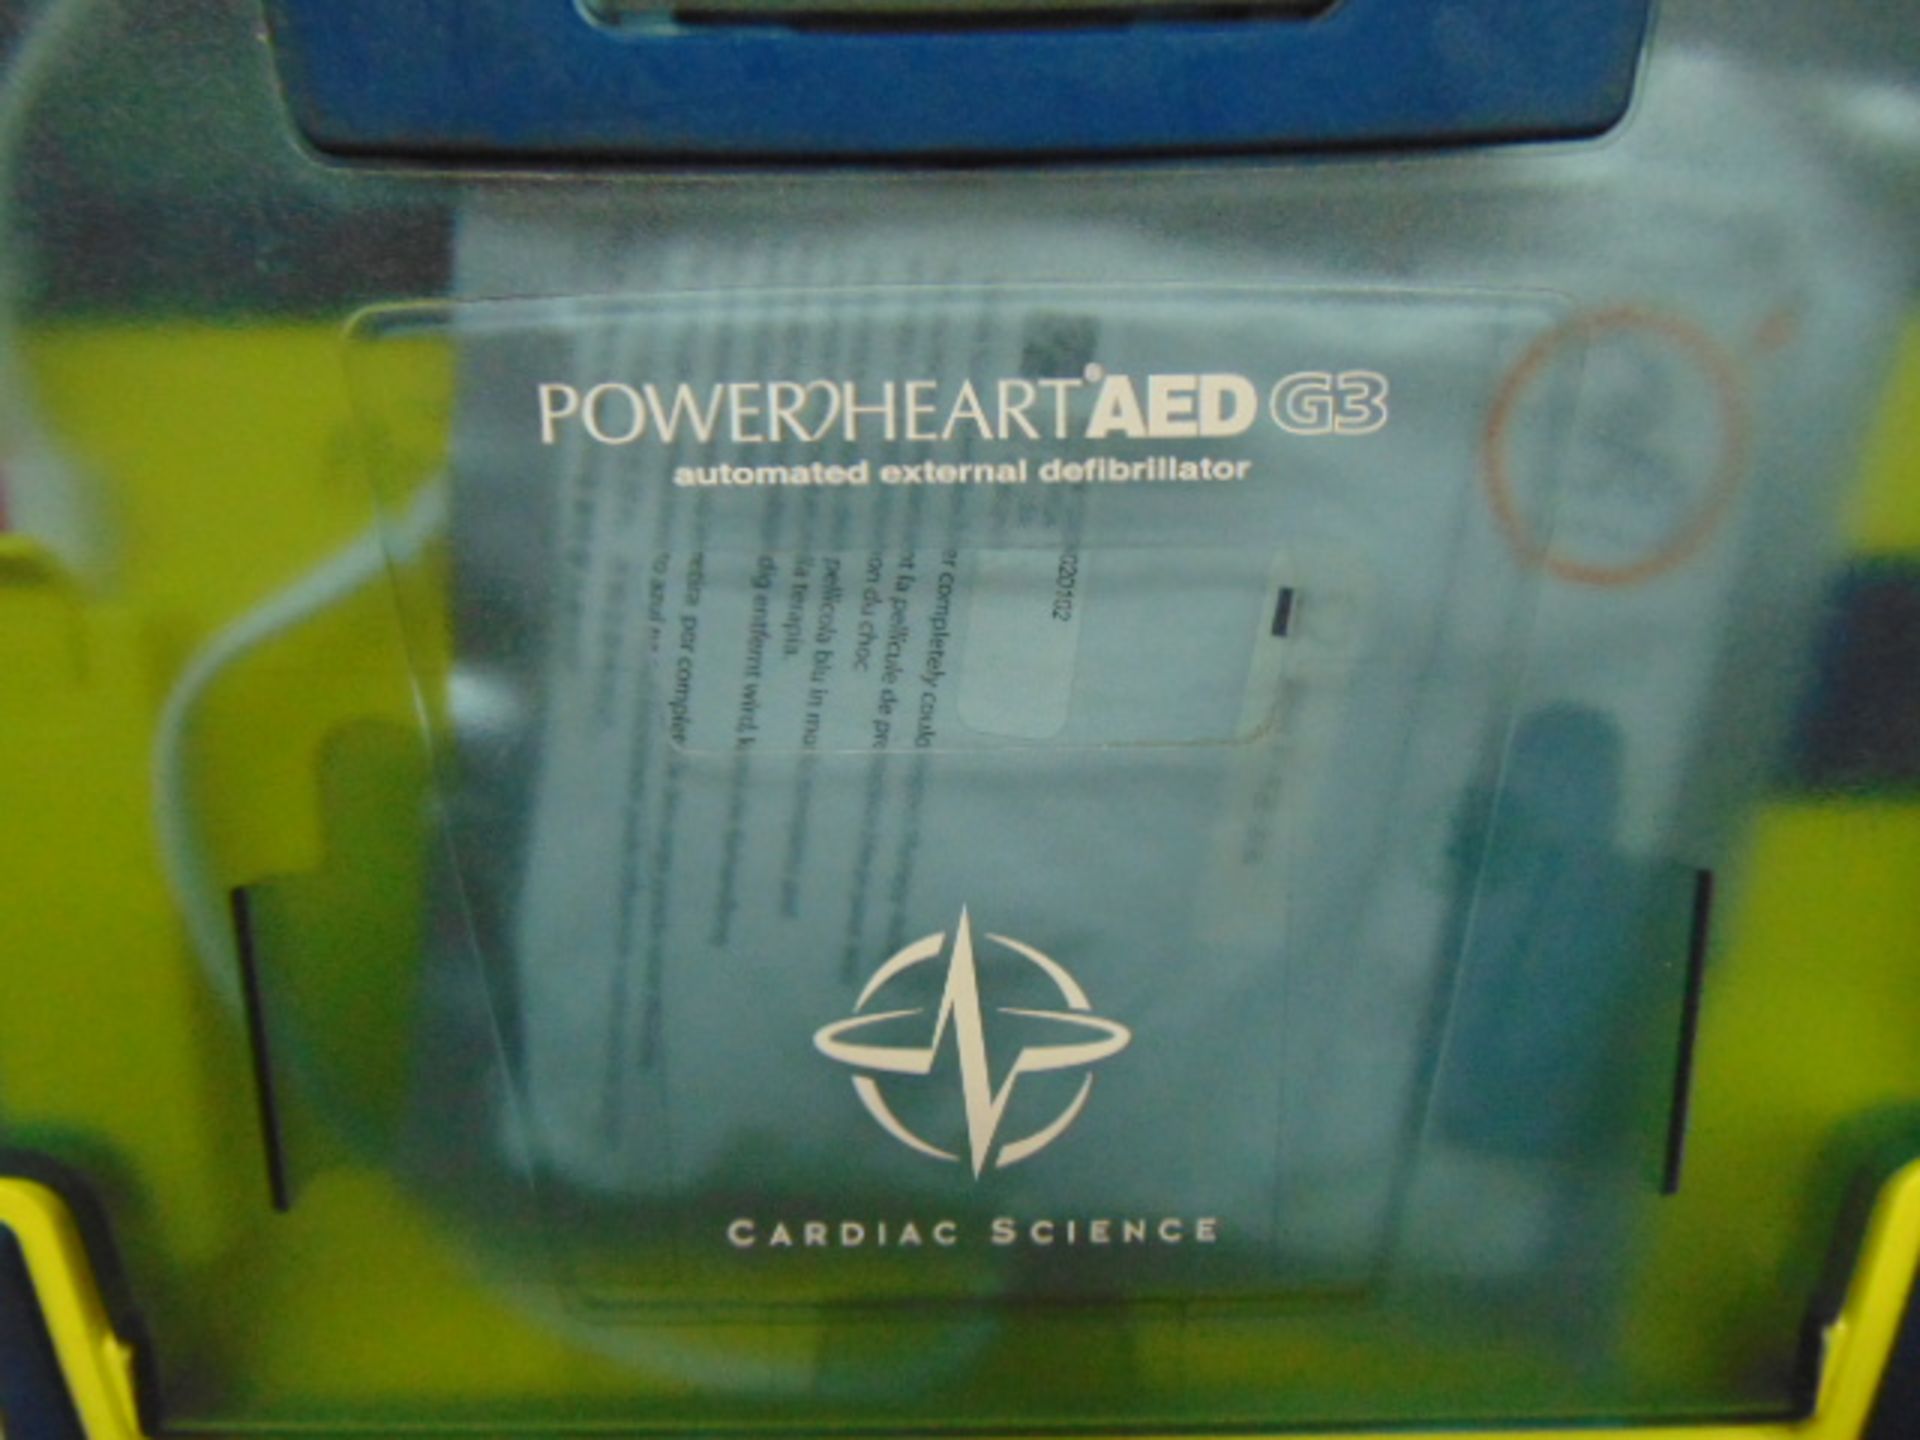 2 x Cardiac Science Powerheart G3 Automatic AED Automatic External Defribrillators - Image 5 of 10